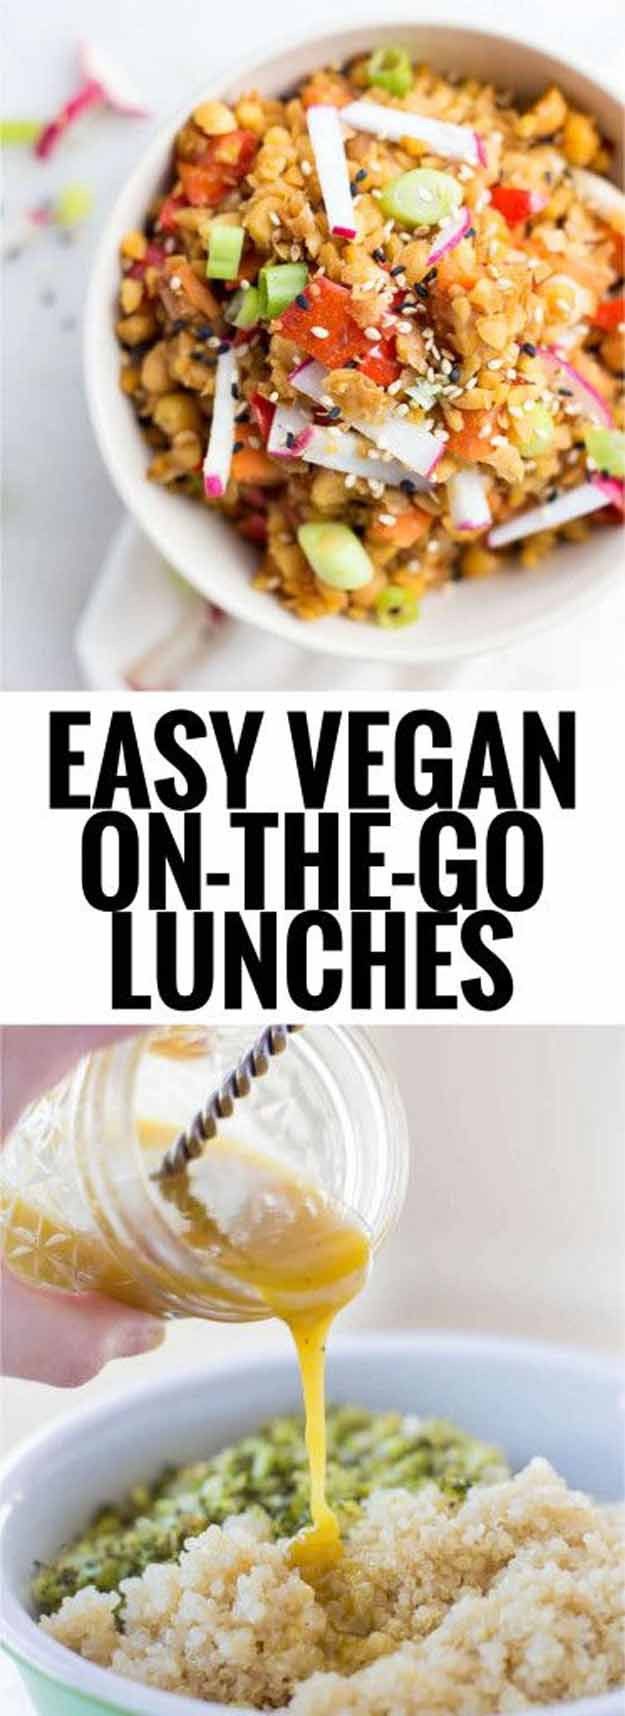 Easy Vegetarian Recipes For College Students
 35 More Healthy Lunches For Work The Goddess